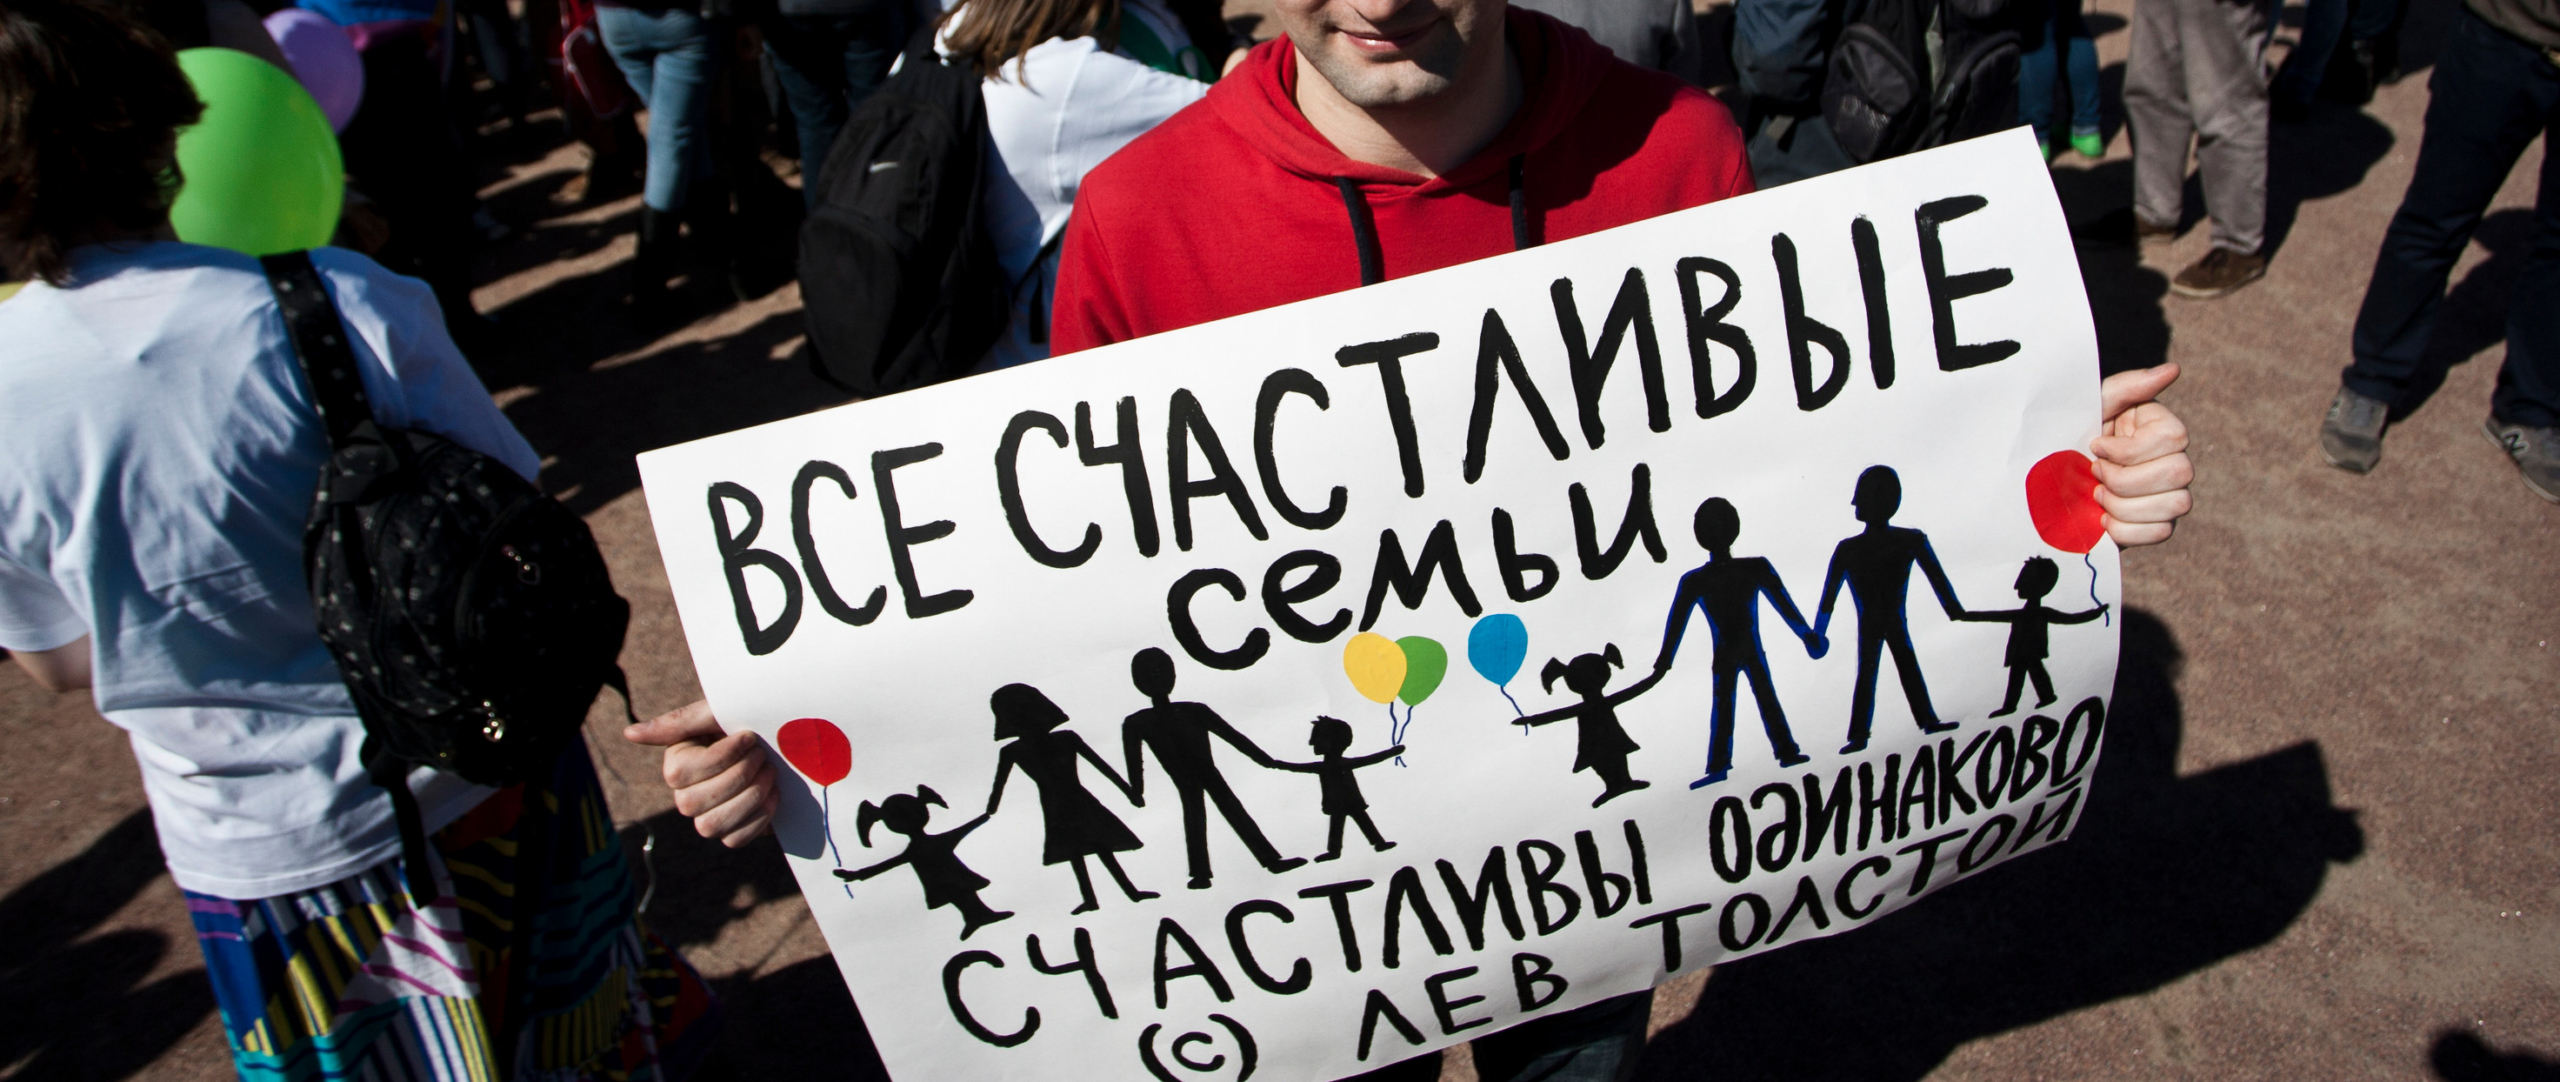 Russia European Court of Human Rights rules ban on same-sex unions violates human rights pic